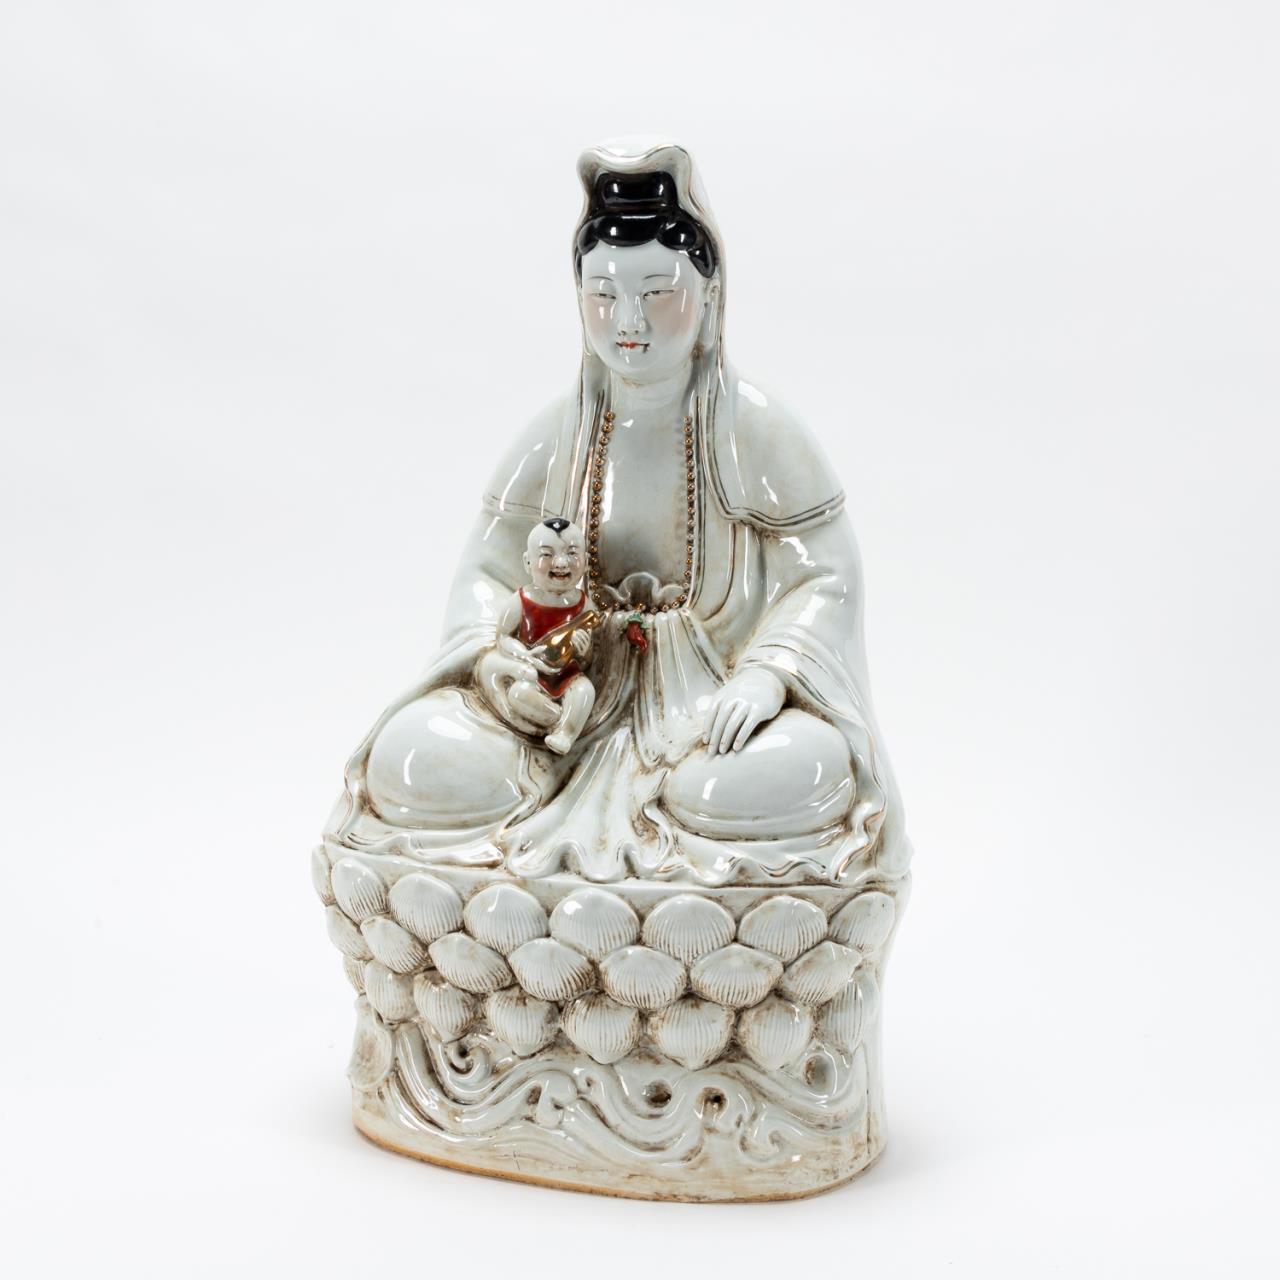 CHINESE LARGE SEATED GUANYIN BRINGER 35a90e